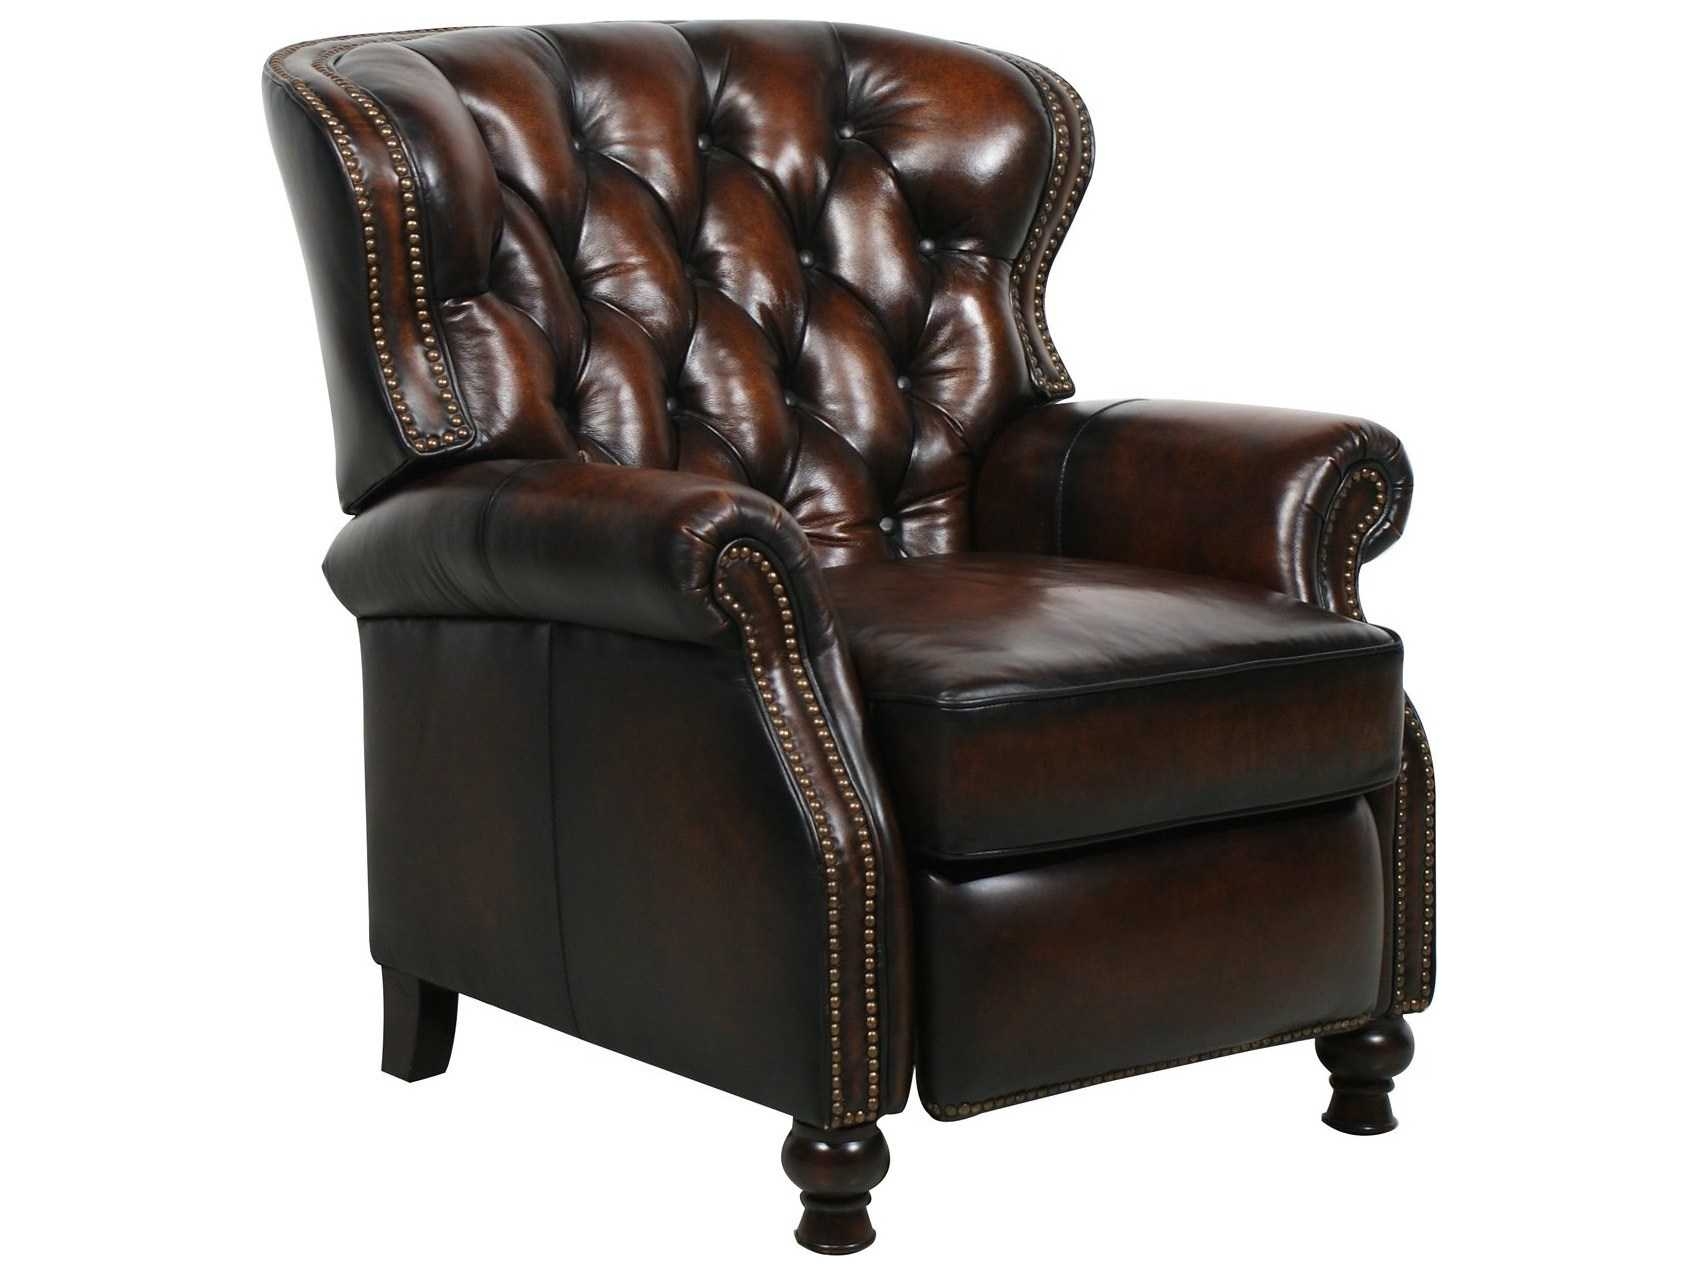 Top Grain Leather Recliner Visualhunt, Genuine Leather Recliners